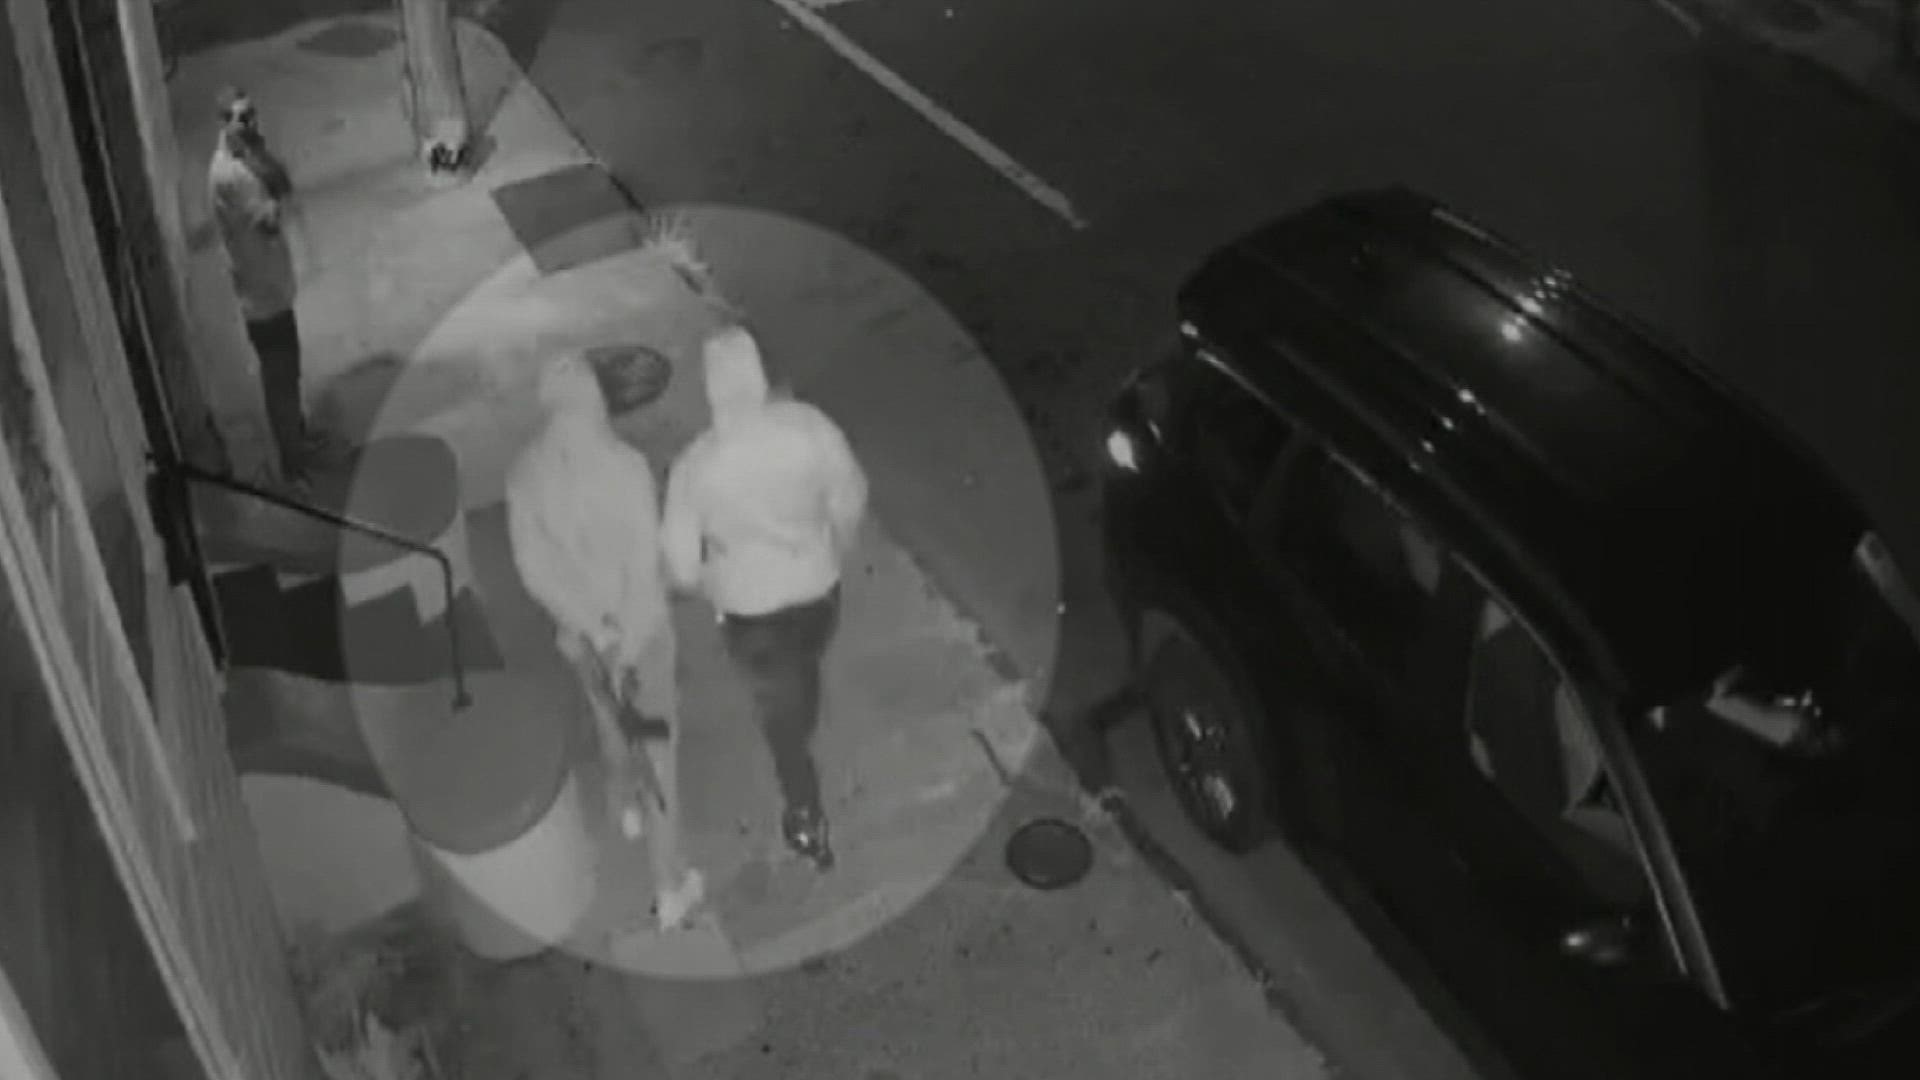 Two suspects shot and killed a man sitting outside Big Daddy's in Marigny